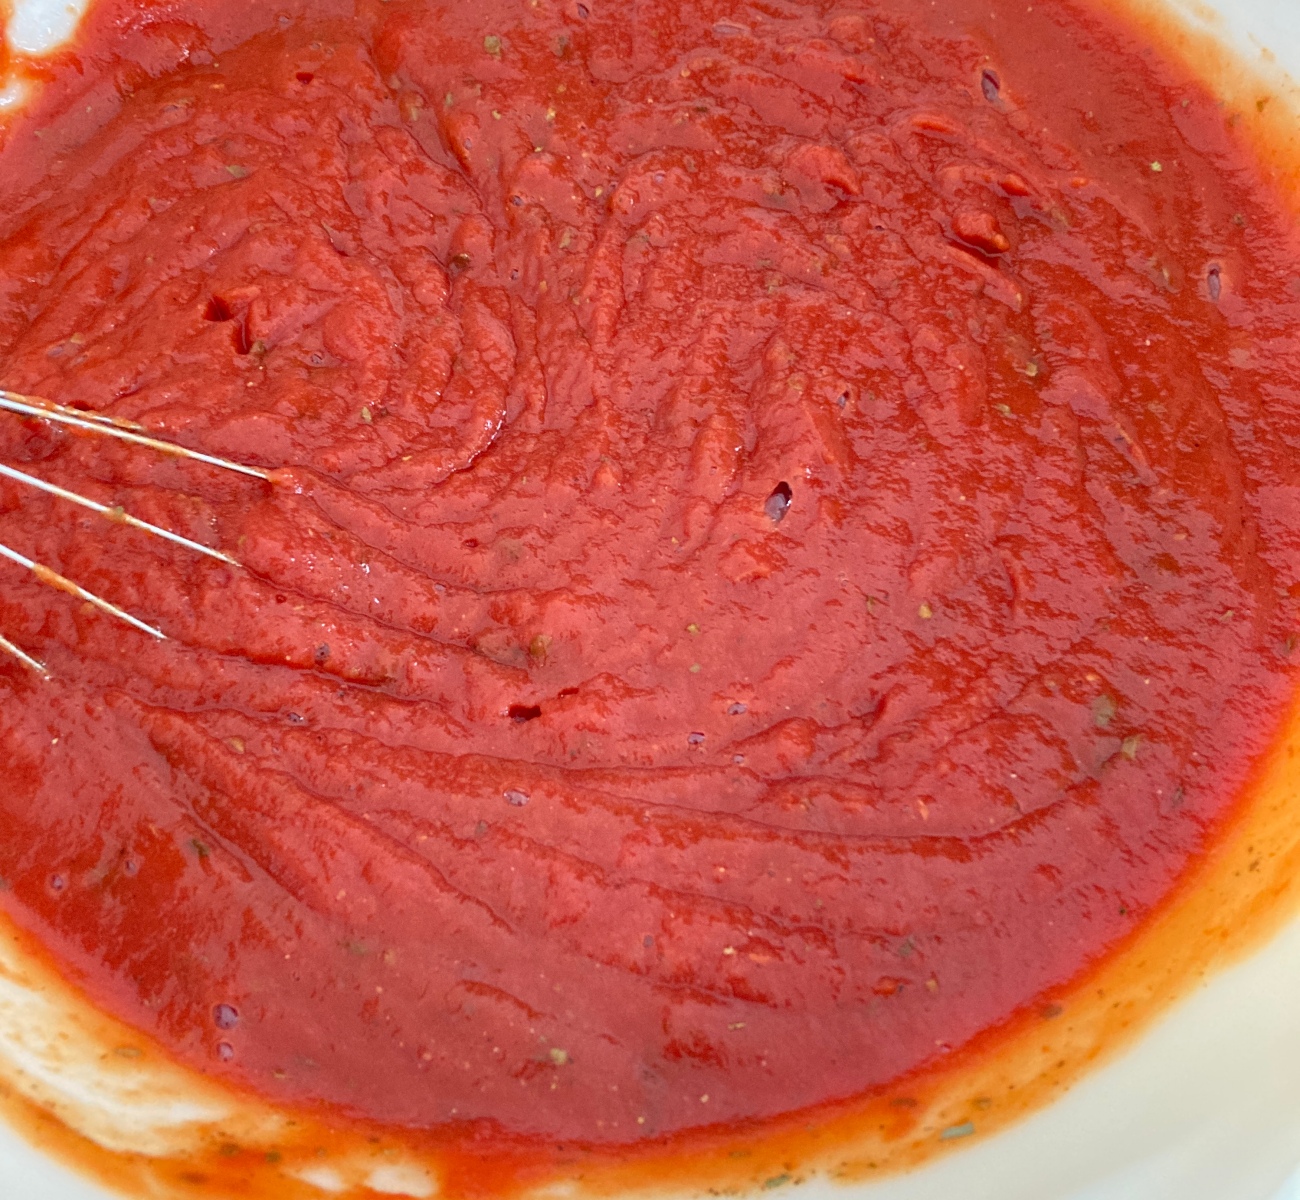 Combine tomato sauce, dried herbs, garlic, and tomato paste in bowl. Add salt and pepper to taste.